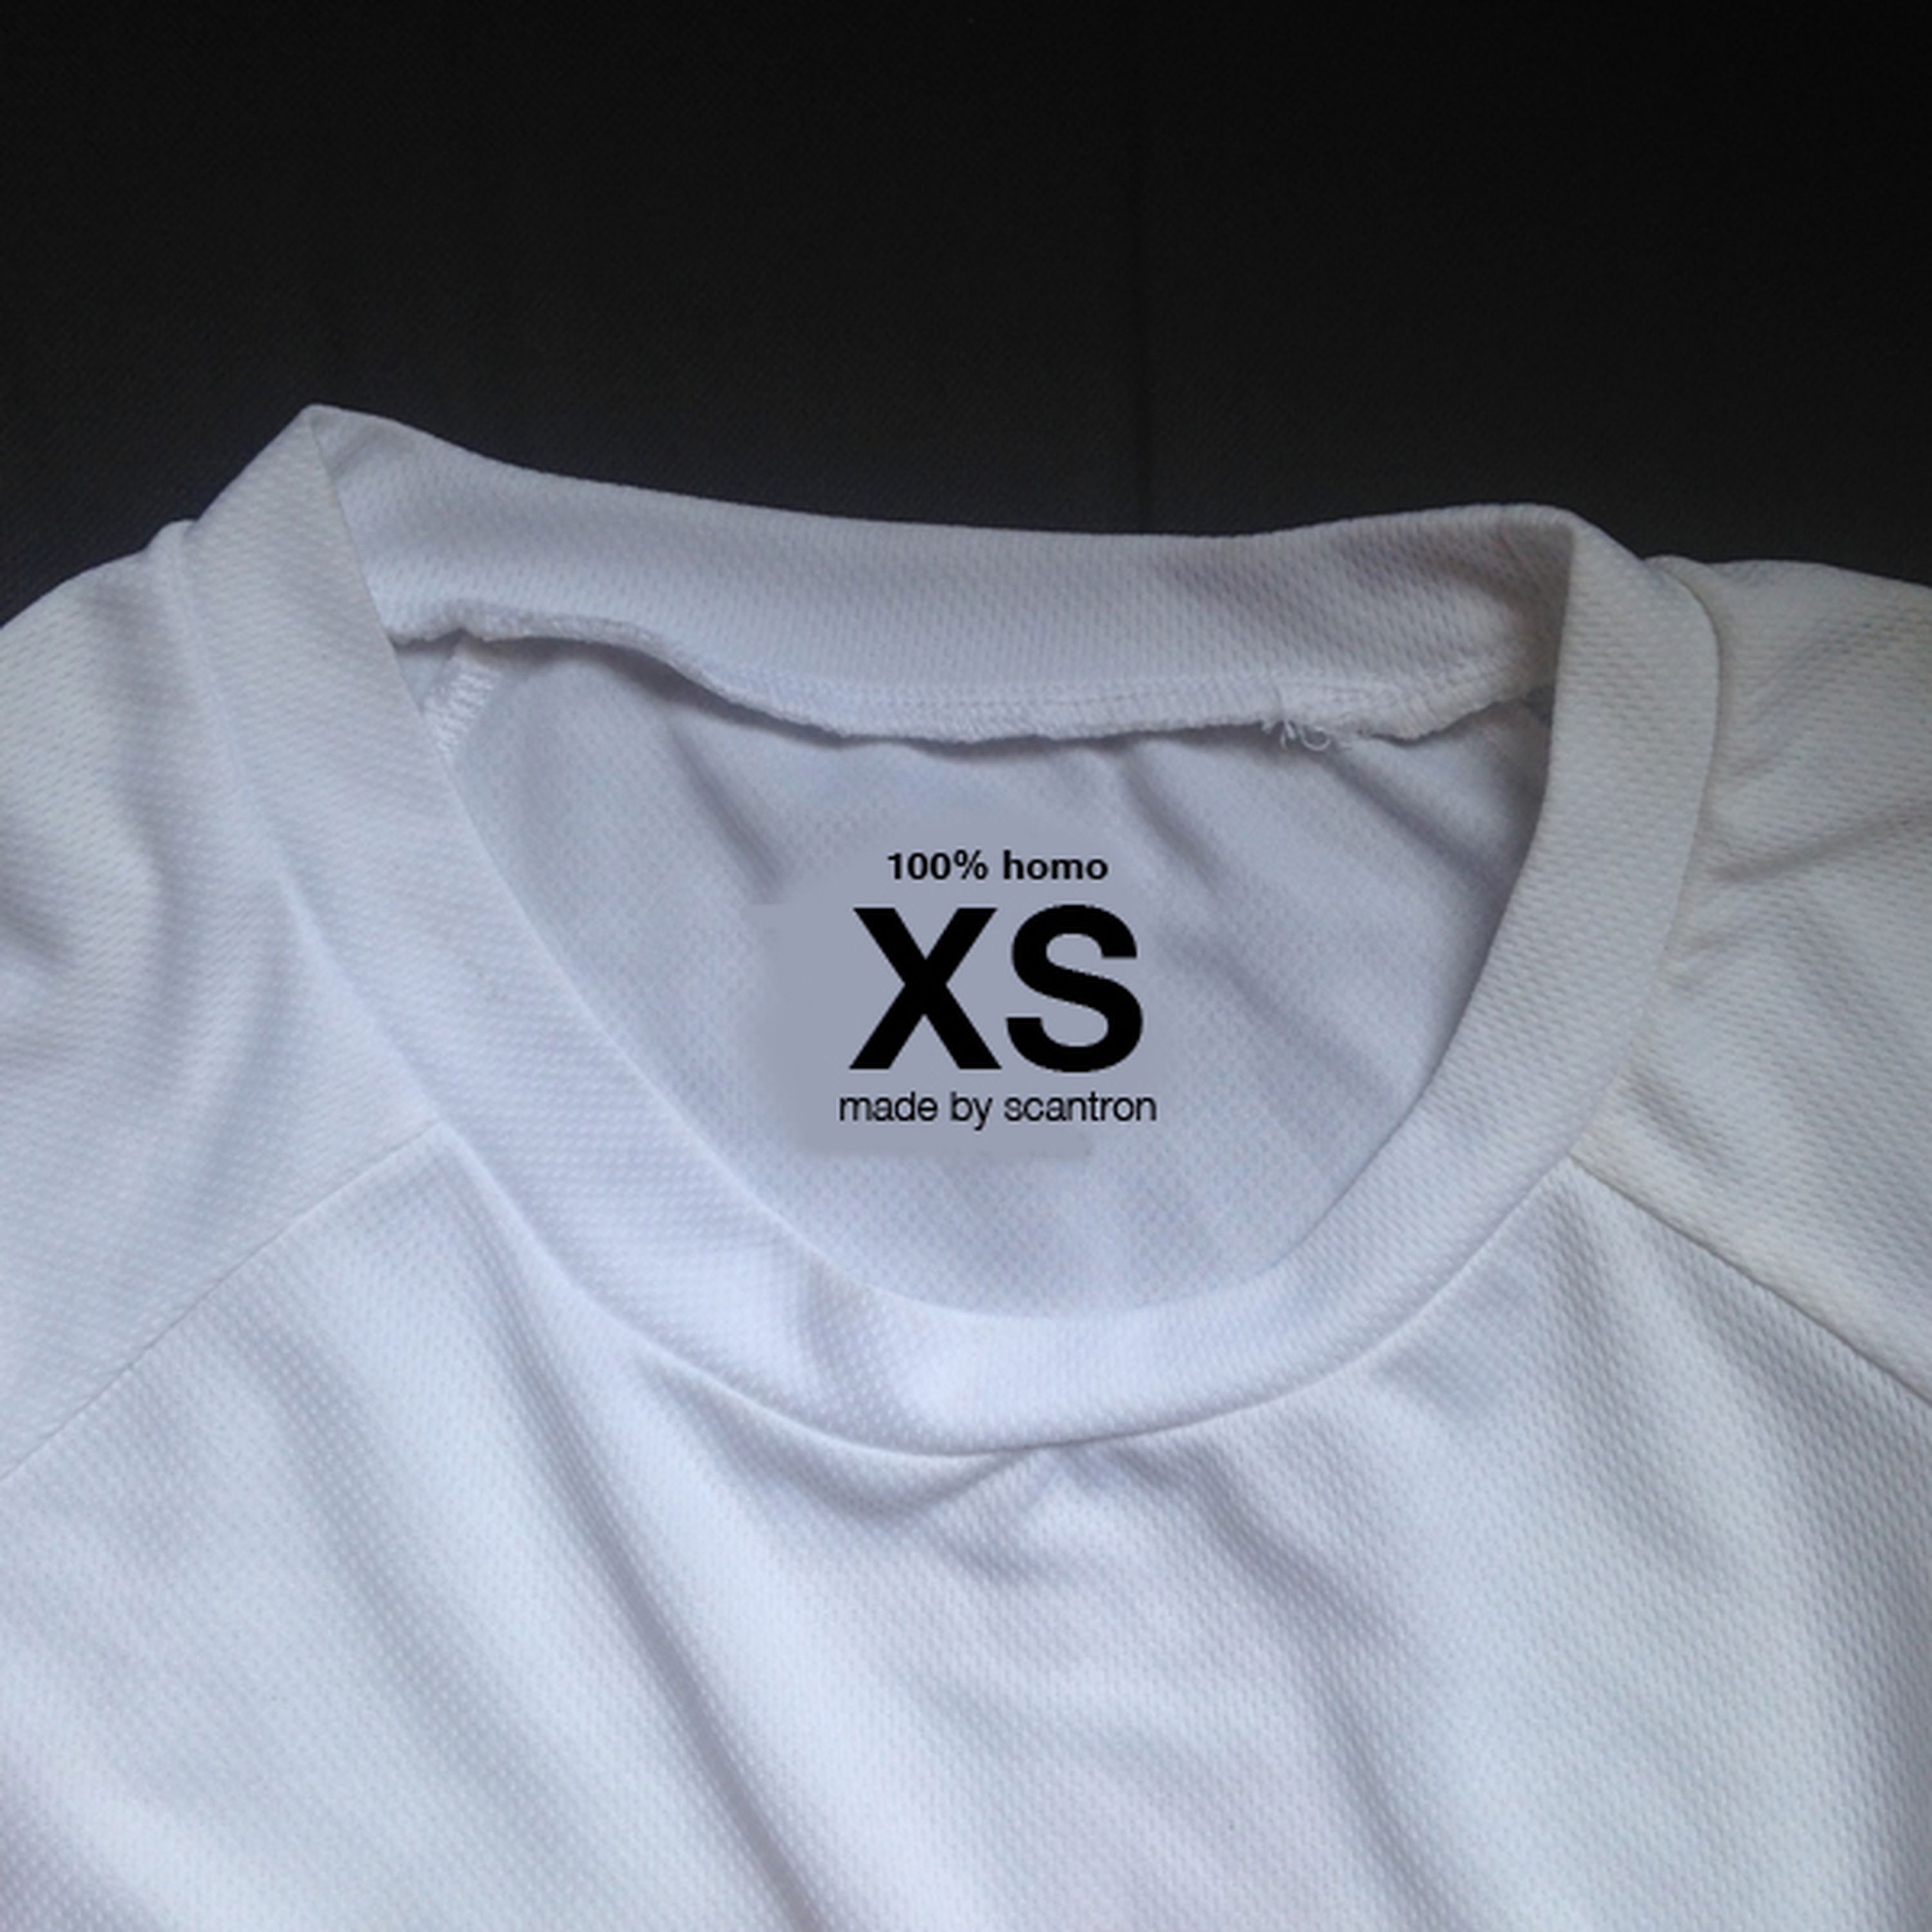 [XS001] One Size Fits All **New Series**